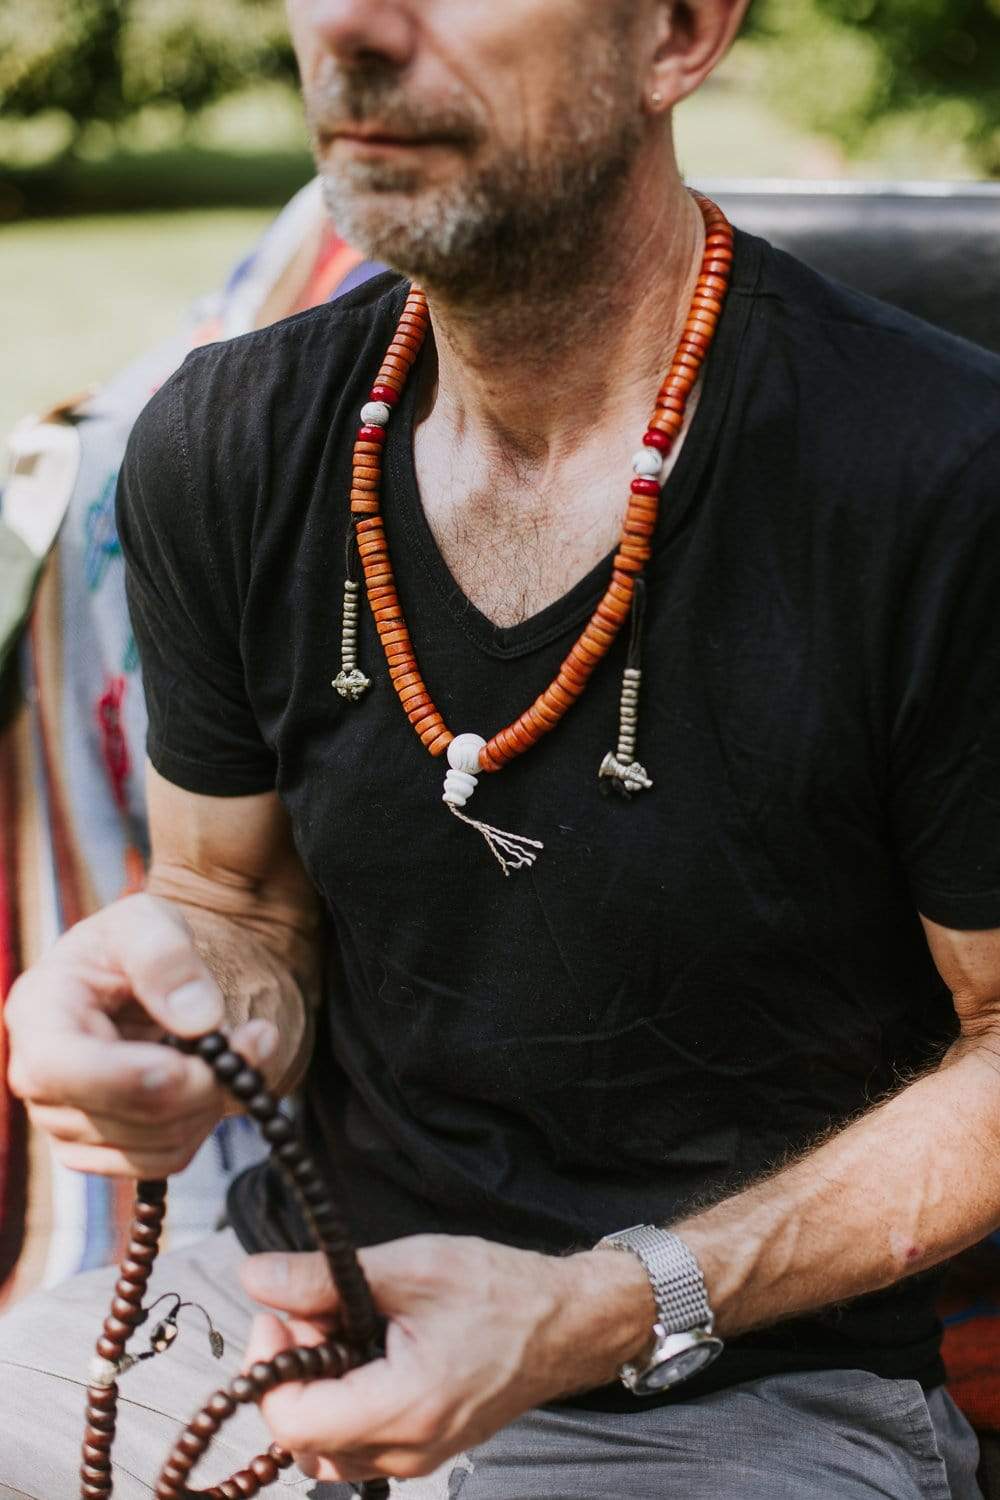 What does bead necklace that monks wear mean? - Quora